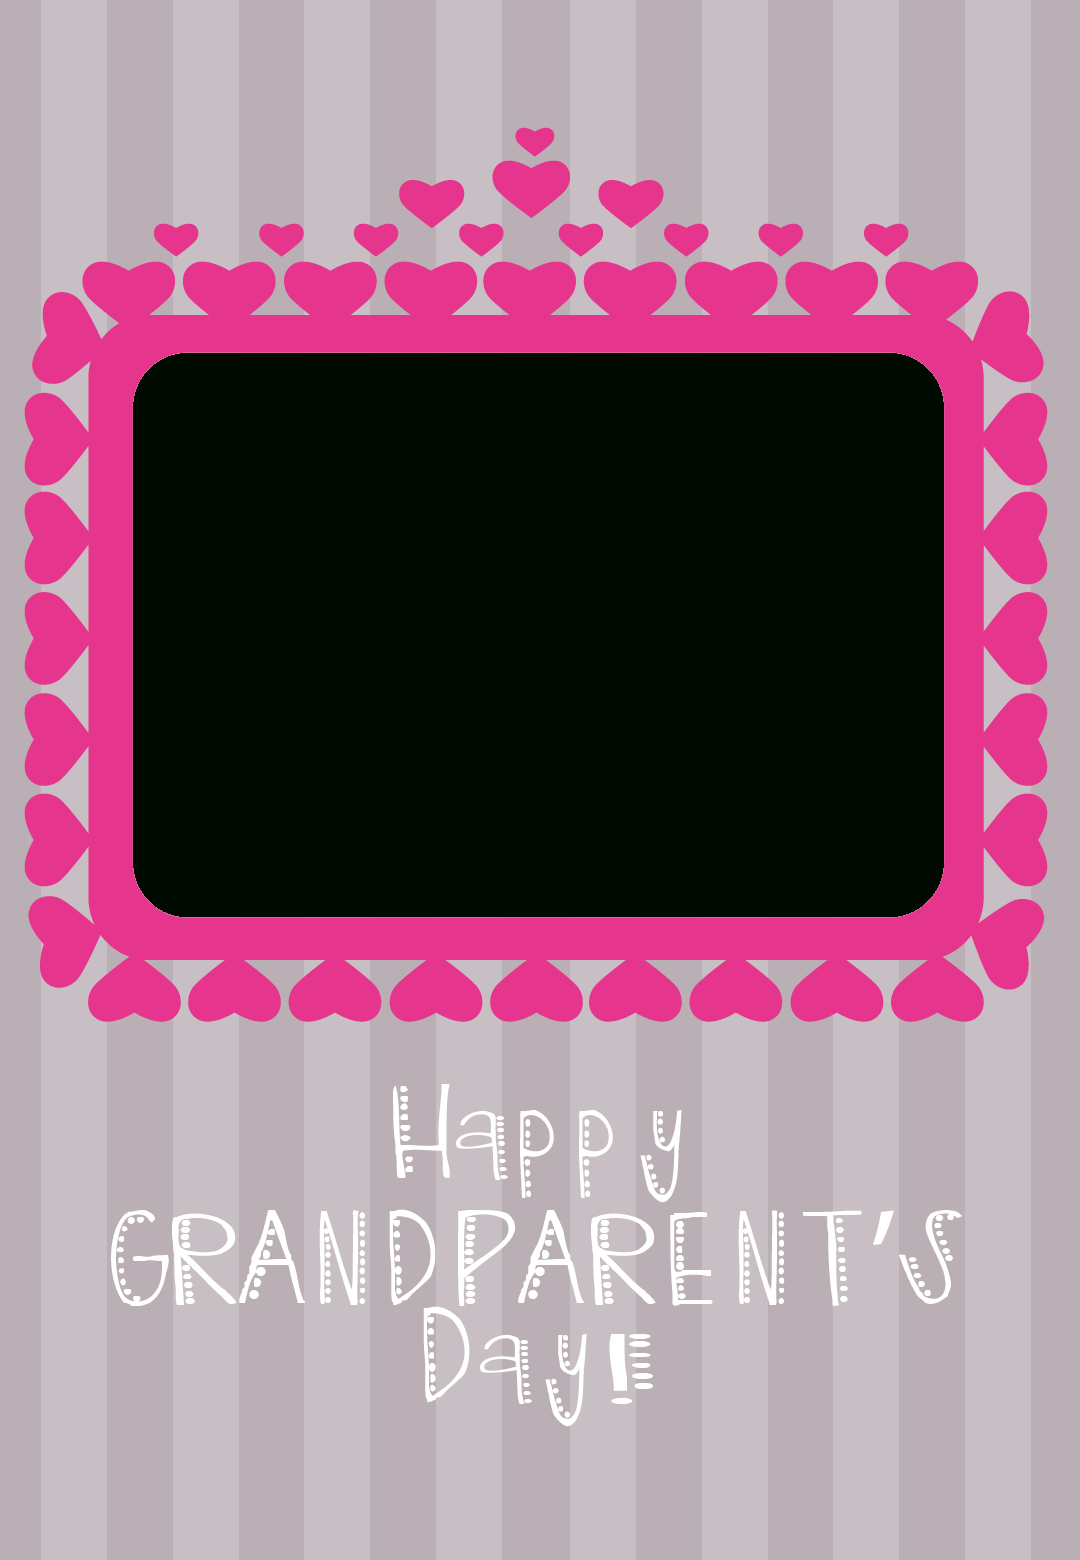 Free Printable The Best Grandparents Ever Greeting Card. Many Other - Free Printable Special Occasion Cards